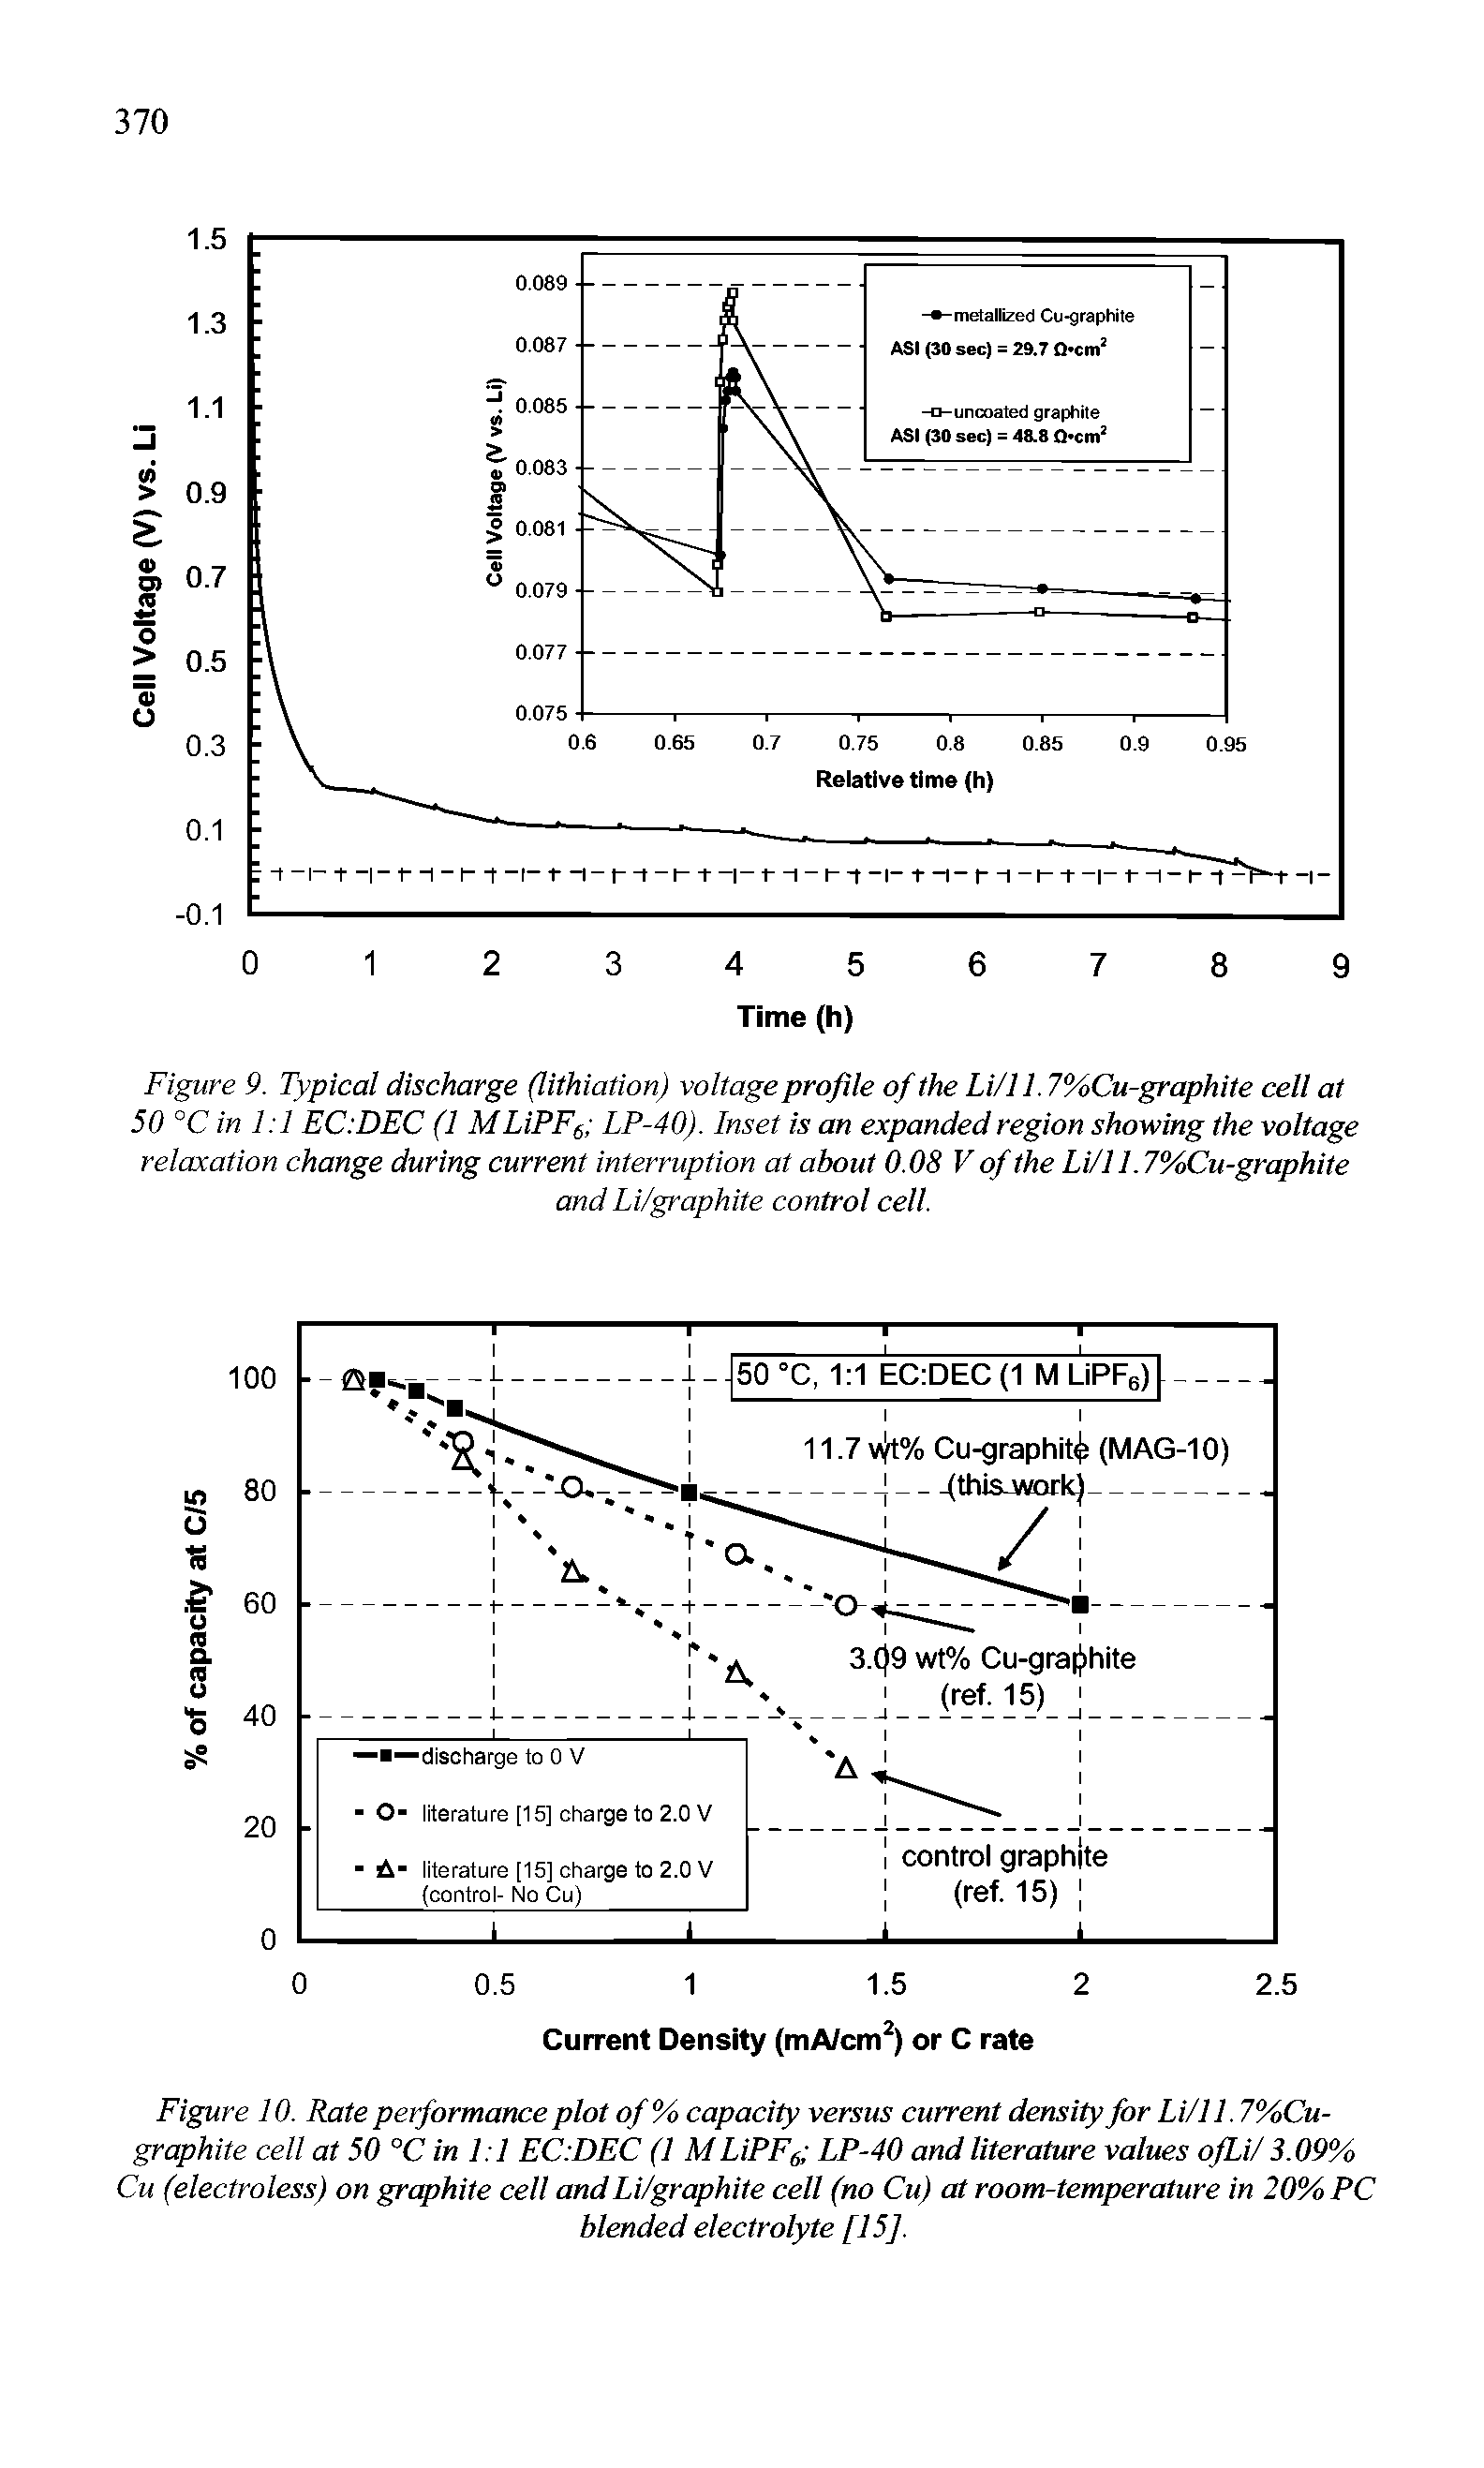 Figure 9. Typical discharge (lithiation) voltage profile of the Li/11.7%Cu-graphite cell at 50 °C in 1 1 EC DEC (1 MLiPF6 LP-40). Inset is an expanded region showing the voltage relaxation change during current interruption at about 0.08 V of the Li/11,7%Cu-graphite...